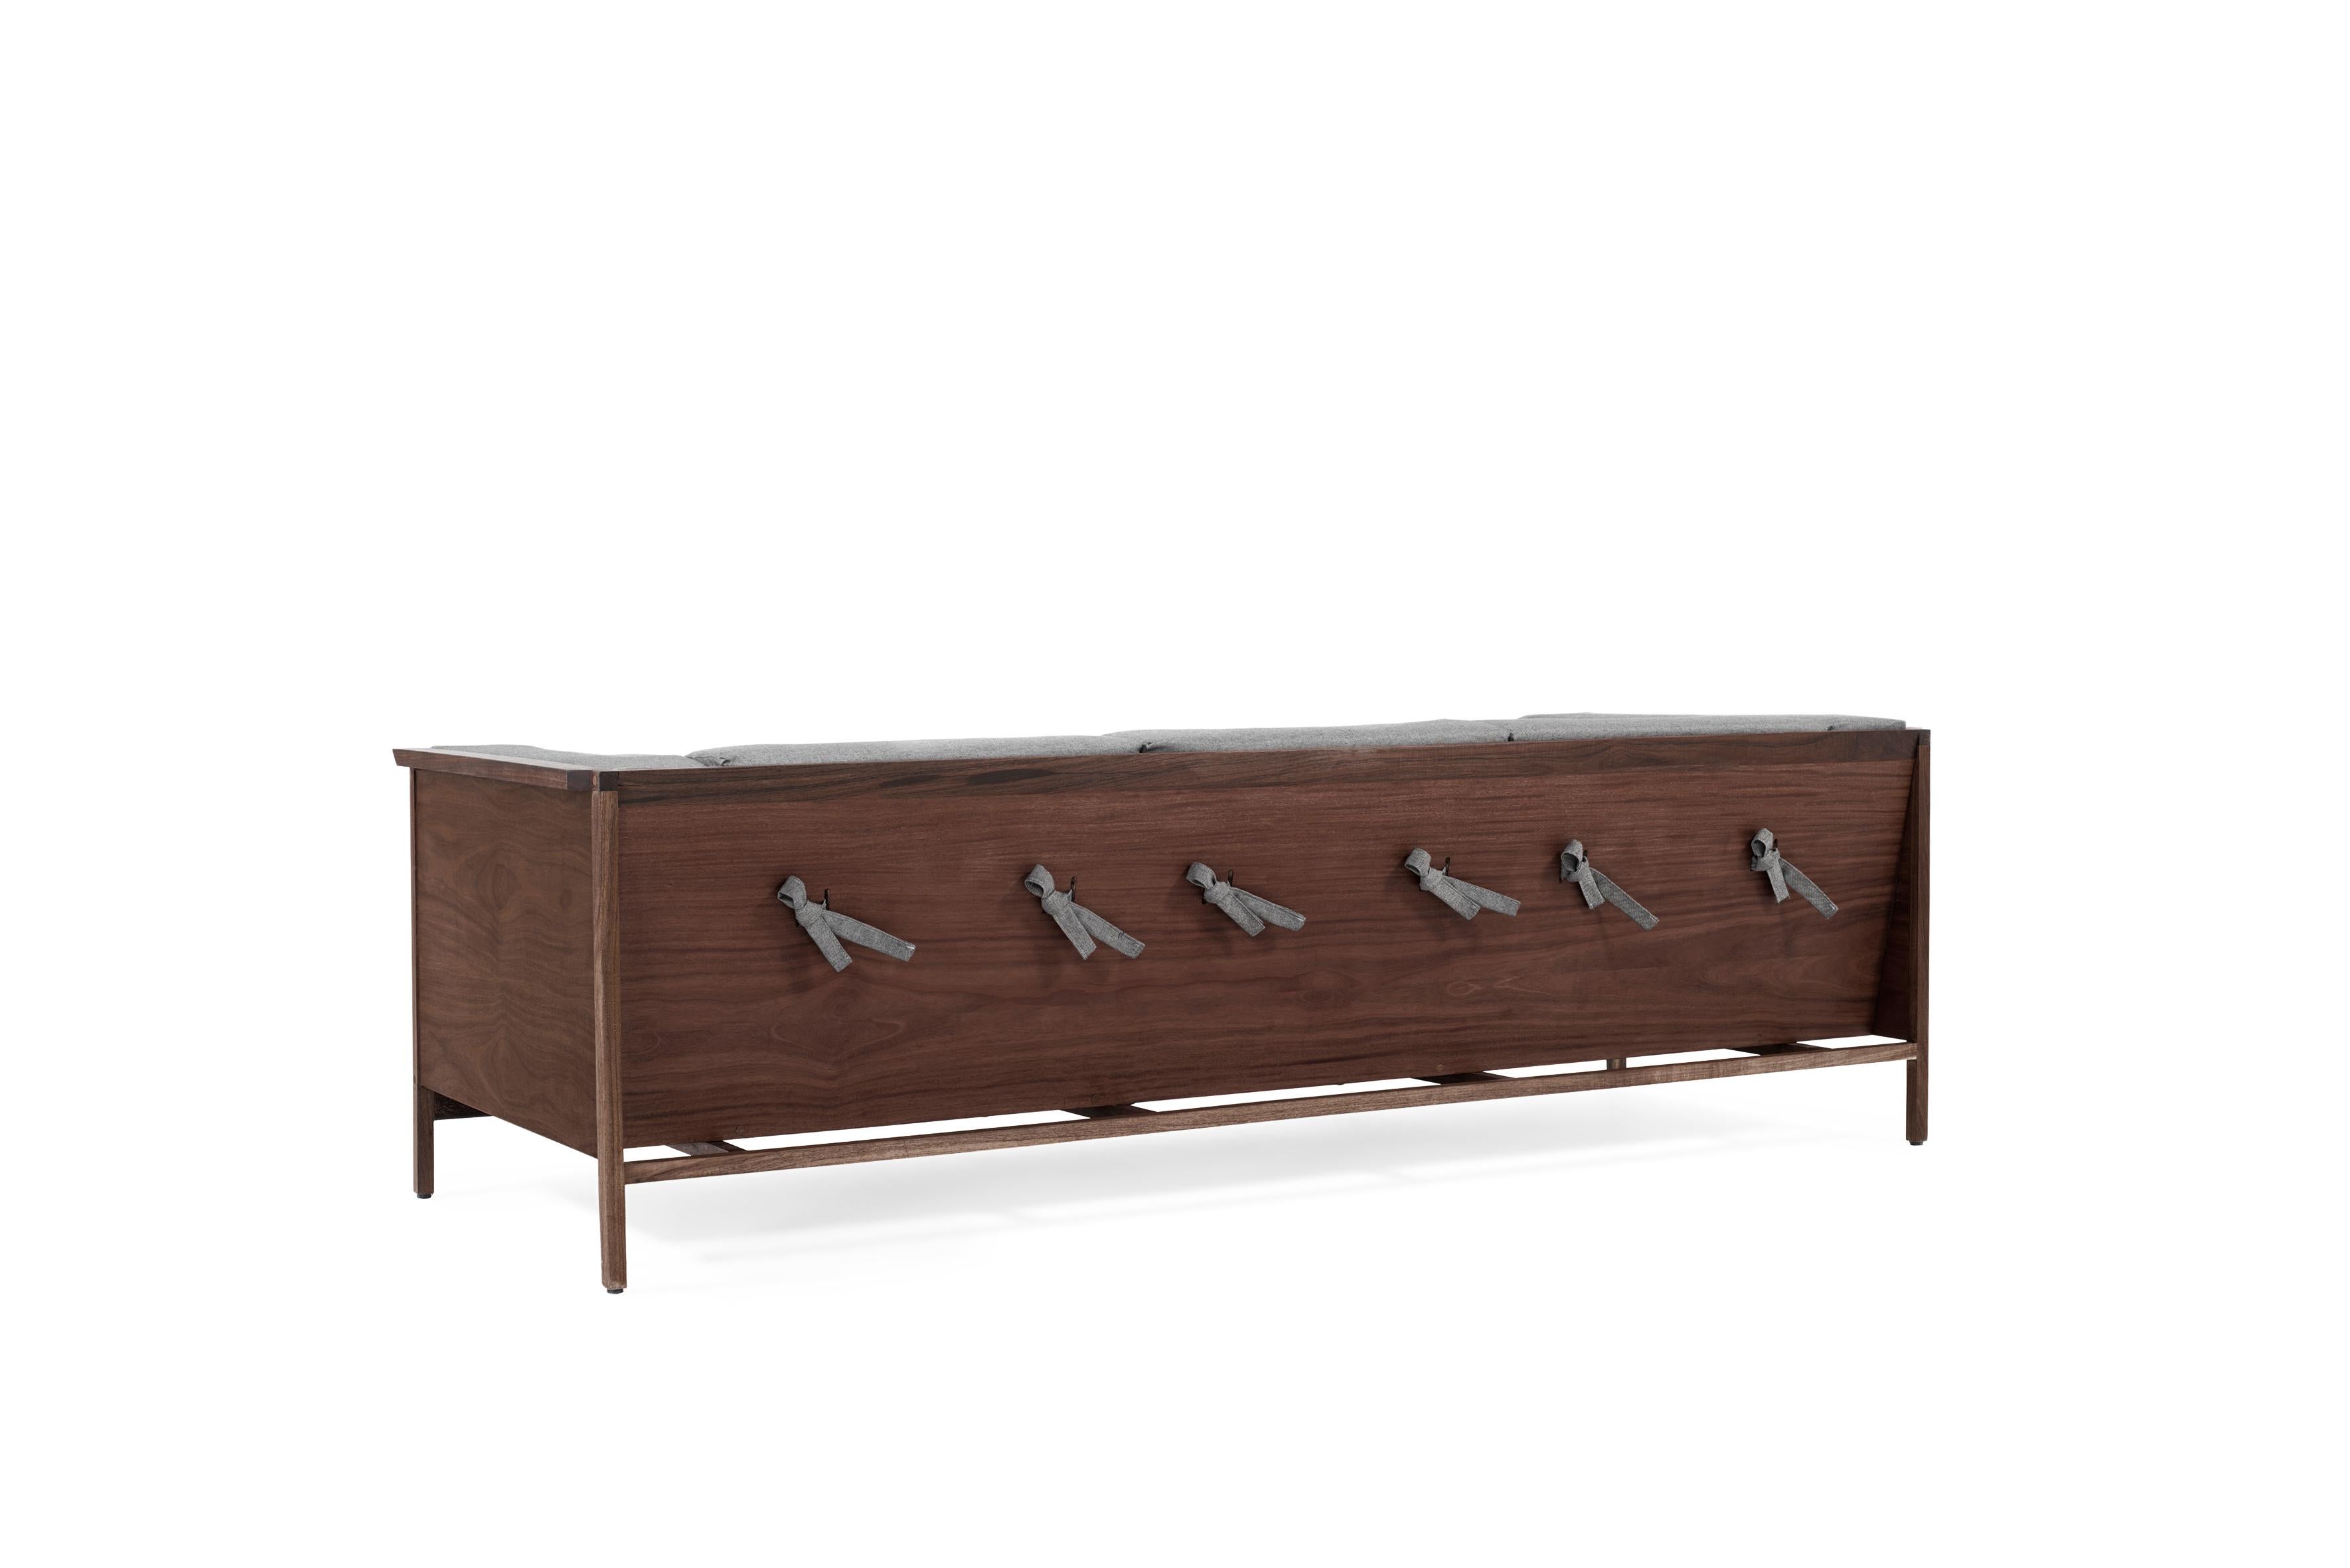 Modern Tres Plazas Confort, Mexican Contemporary Sofa by Emiliano Molina for Cuchara For Sale